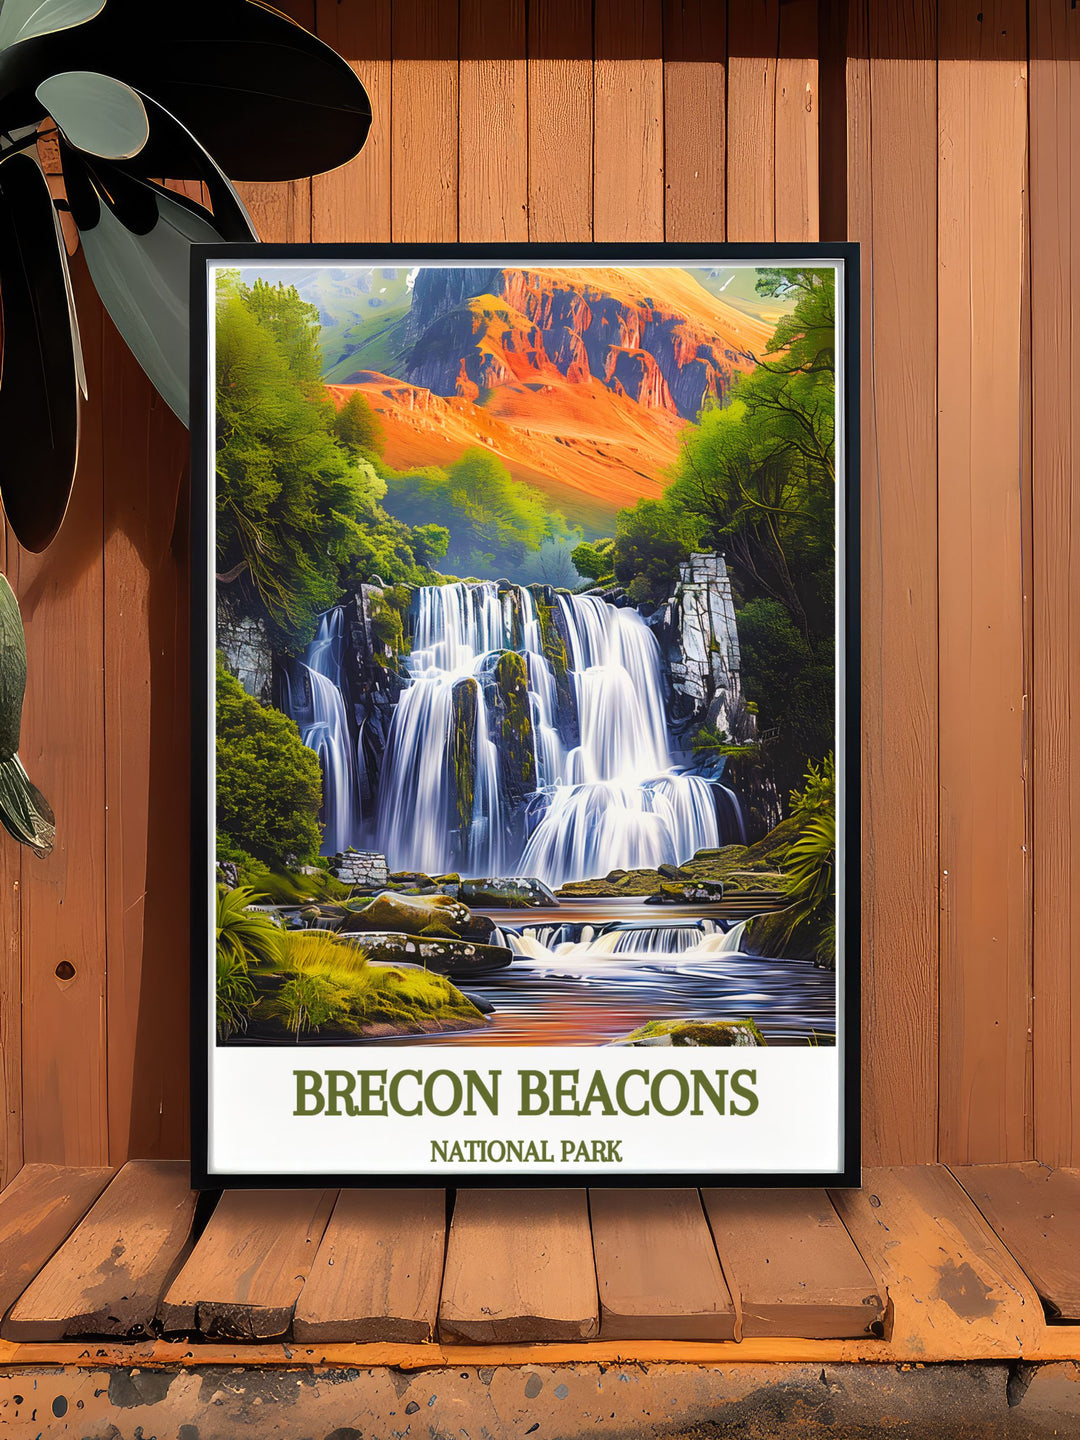 High quality canvas art print of Brecon Beacons Falls, printed on 220gsm acid free Epson professional matt archive paper with ultra chrome archival inks. Ensuring long lasting vibrancy and pristine condition for years to come.